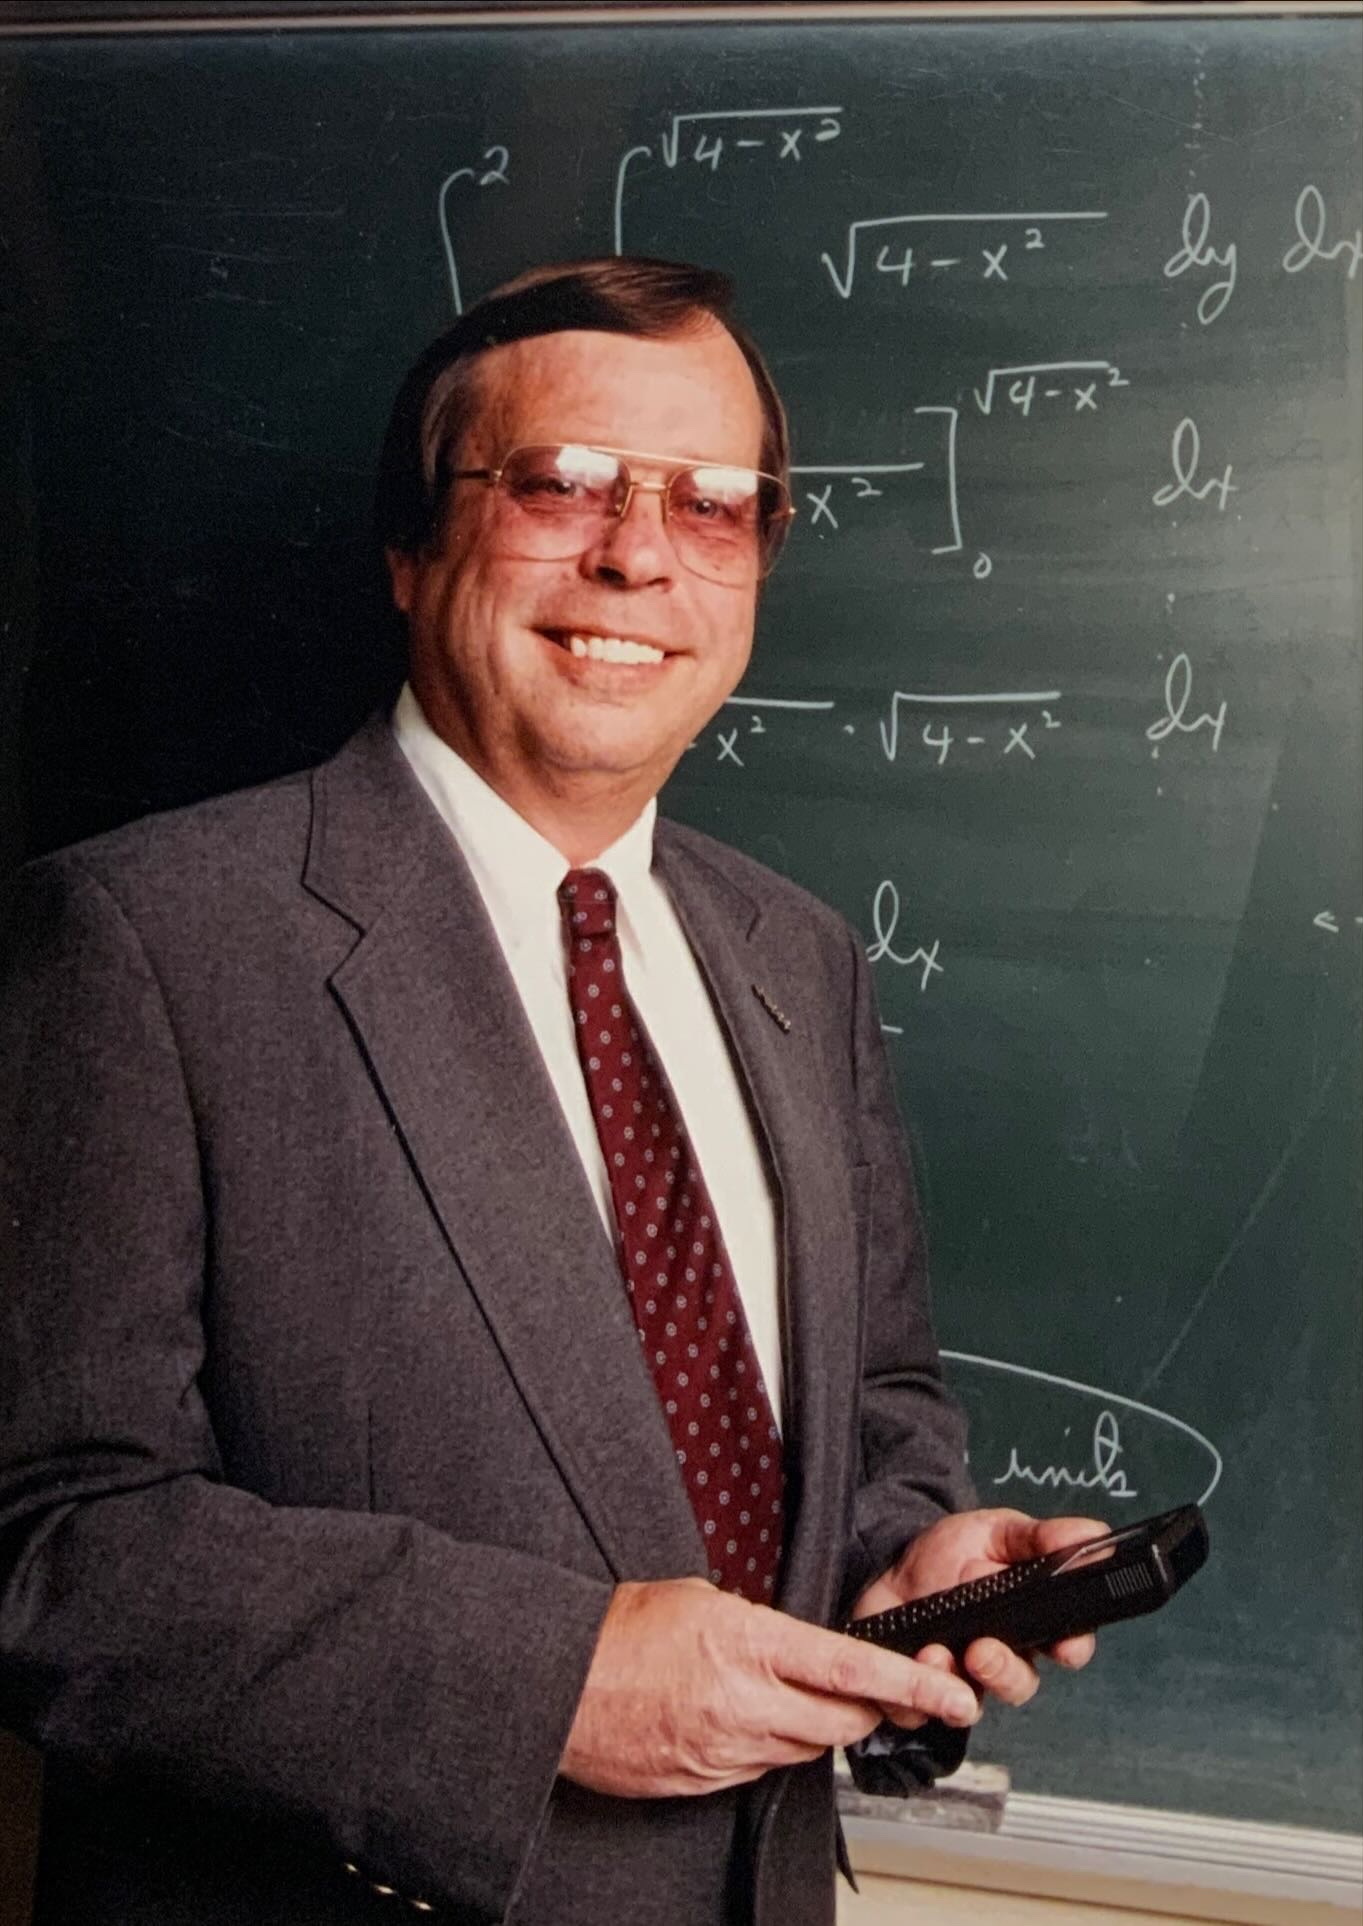 Raymond Tanner in the classroom at the JC Campus